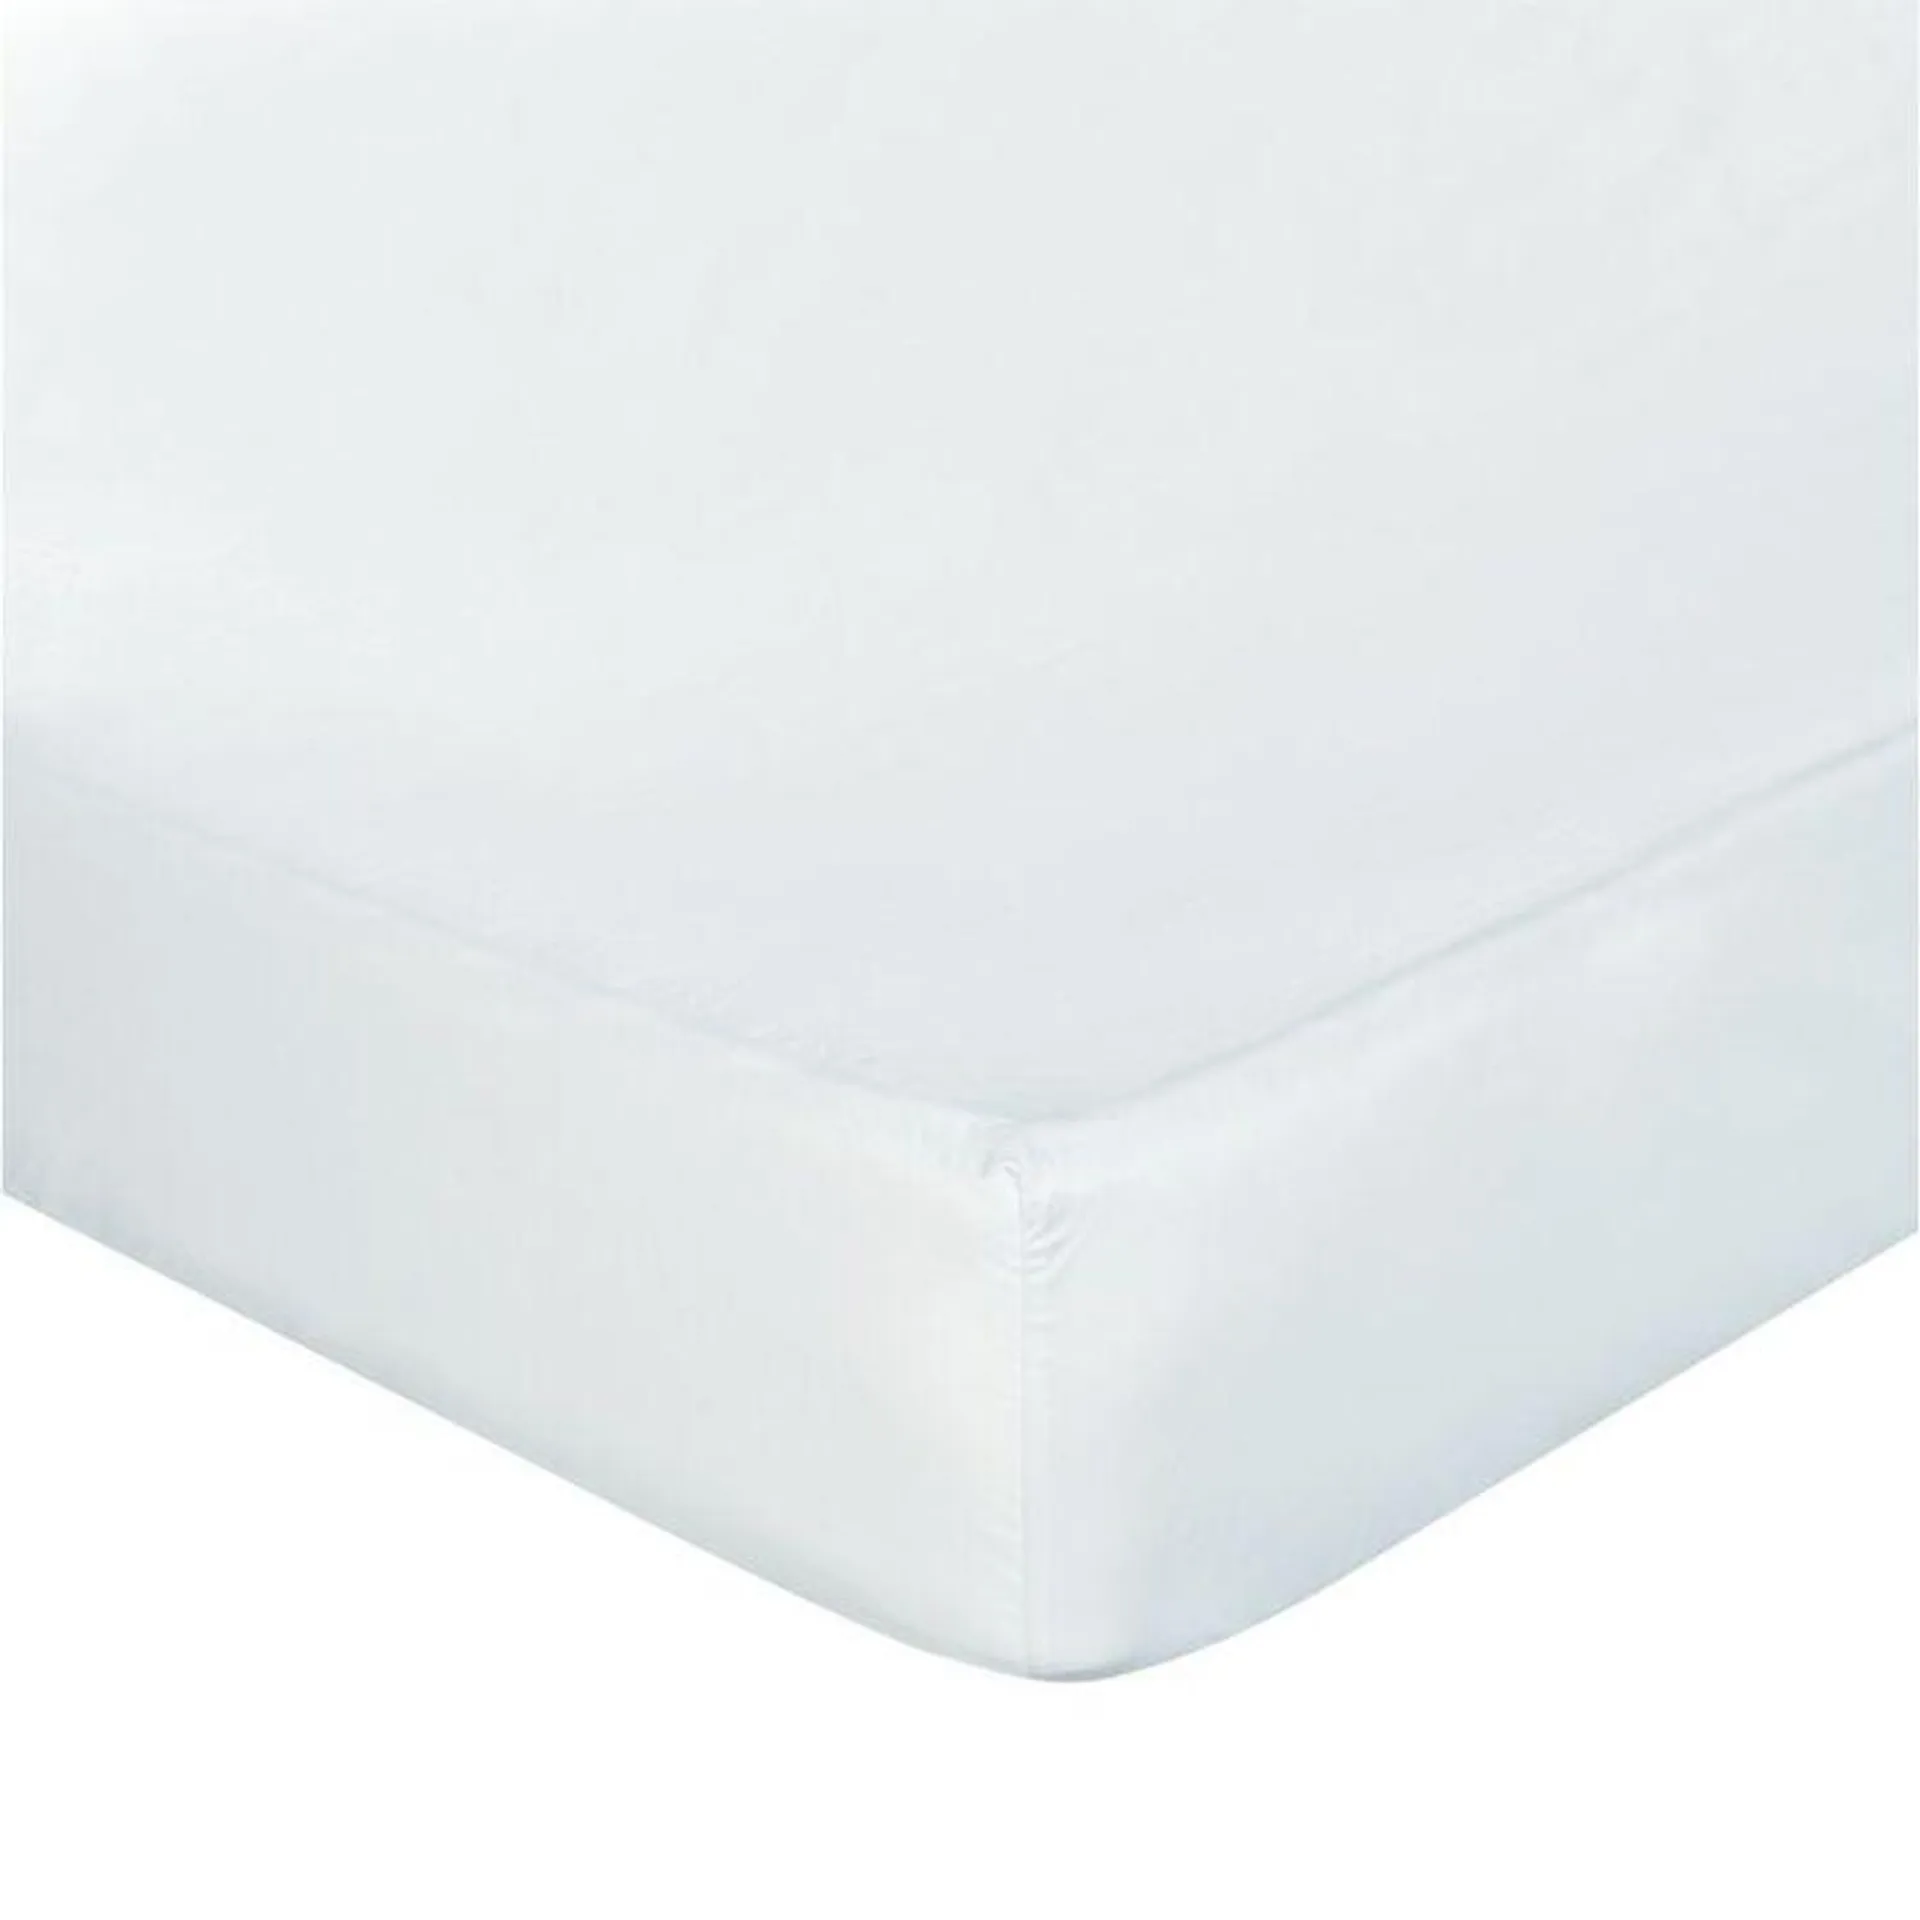 Elysian 1000 Thread Count Egyptian Cotton Fitted Sheet White